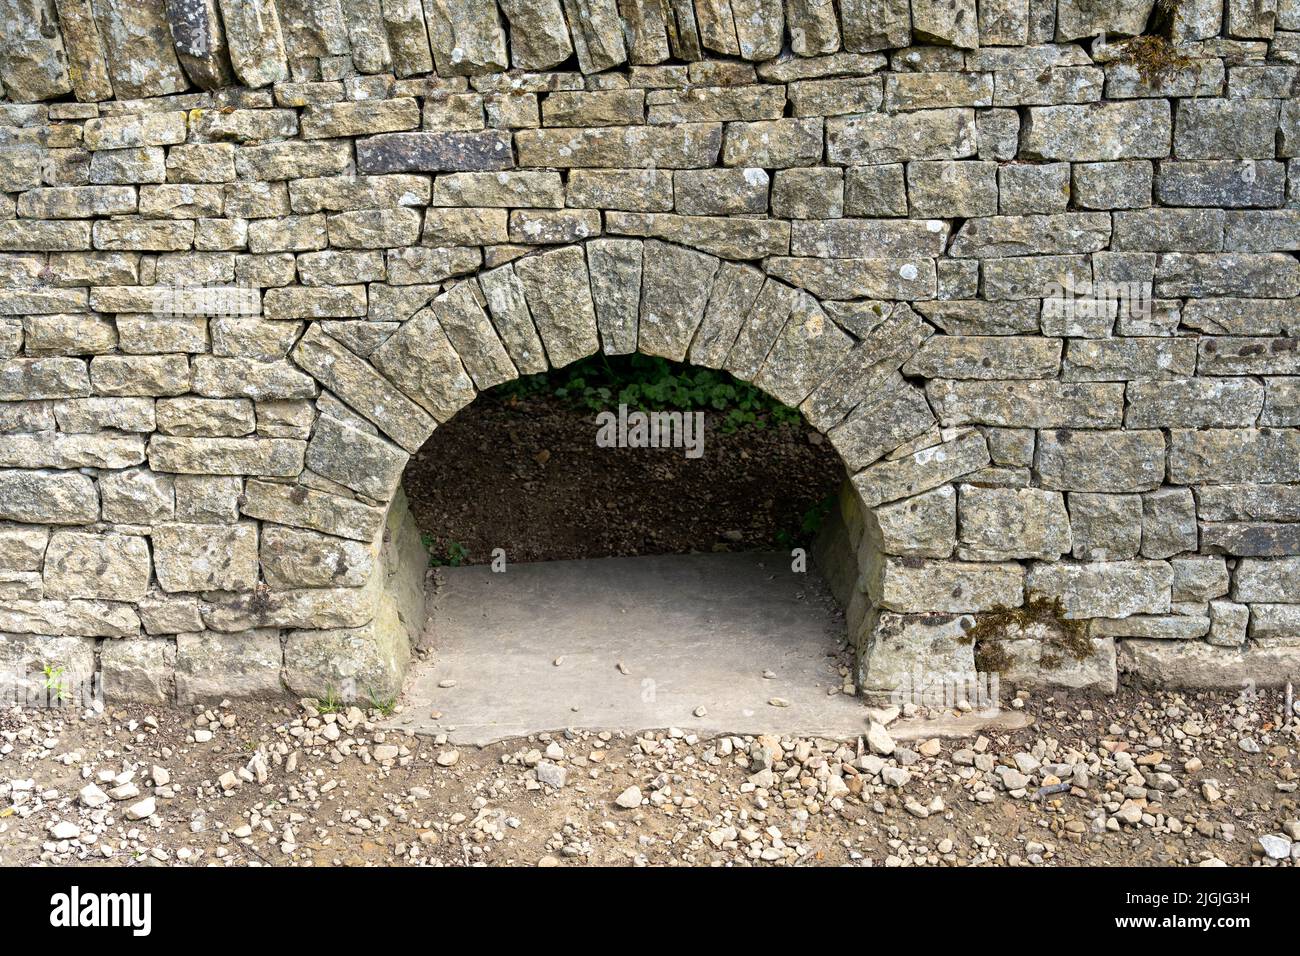 A lunky, also known as a creep-hole or hog-hole, used for a farmer to control the passage of sheep from one field to another in the UK. Stock Photo